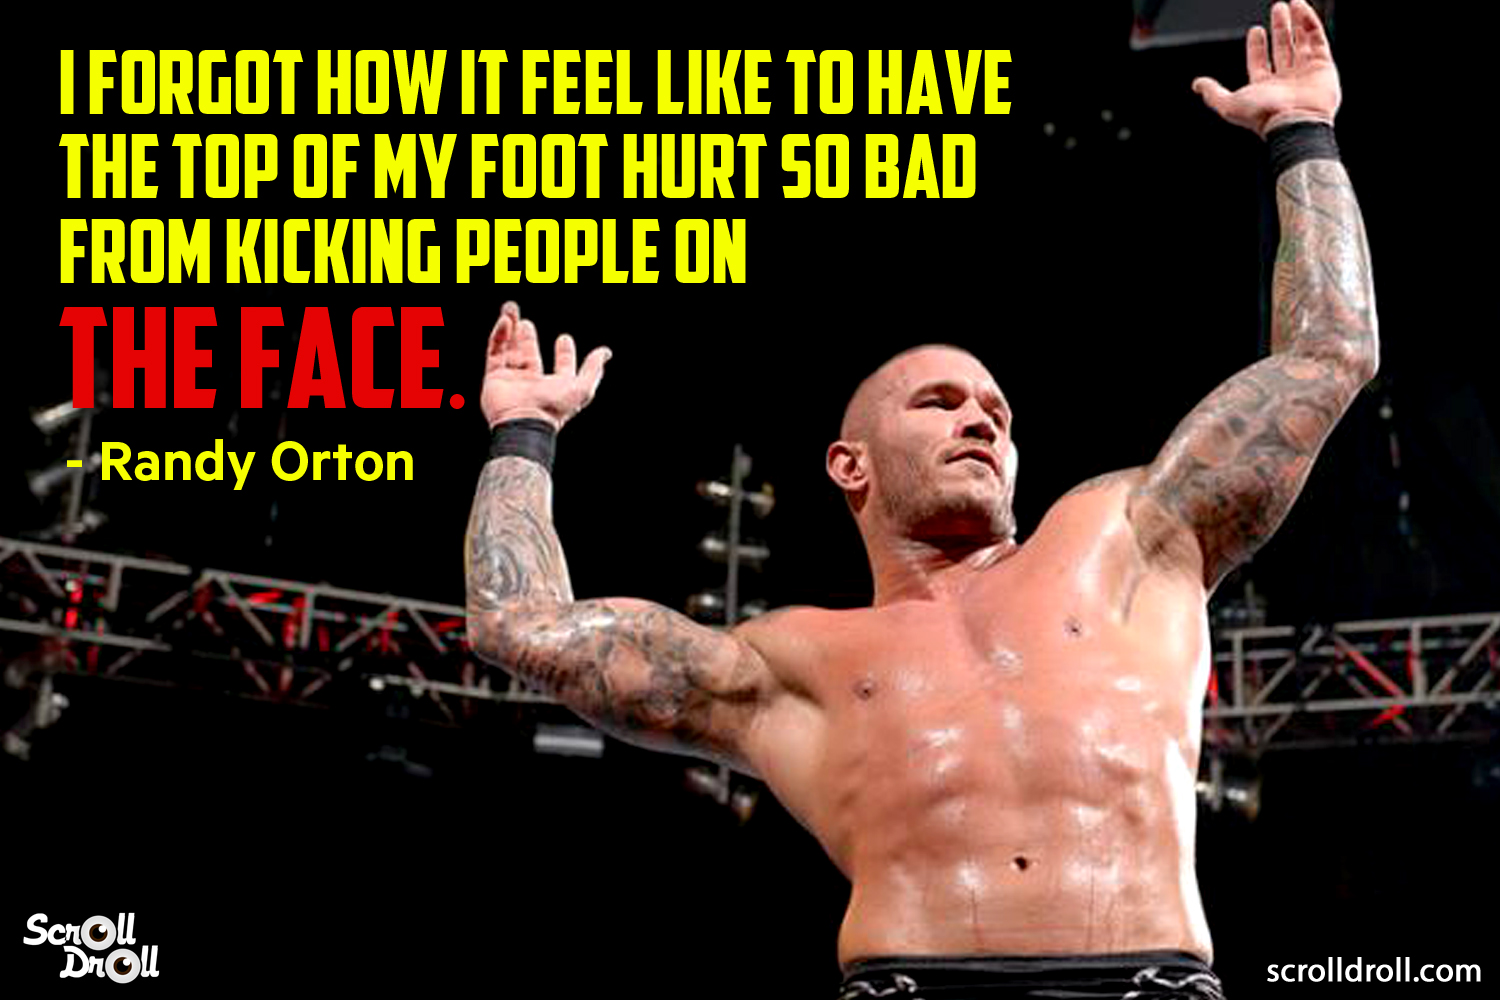 wwe wrestlers quotes